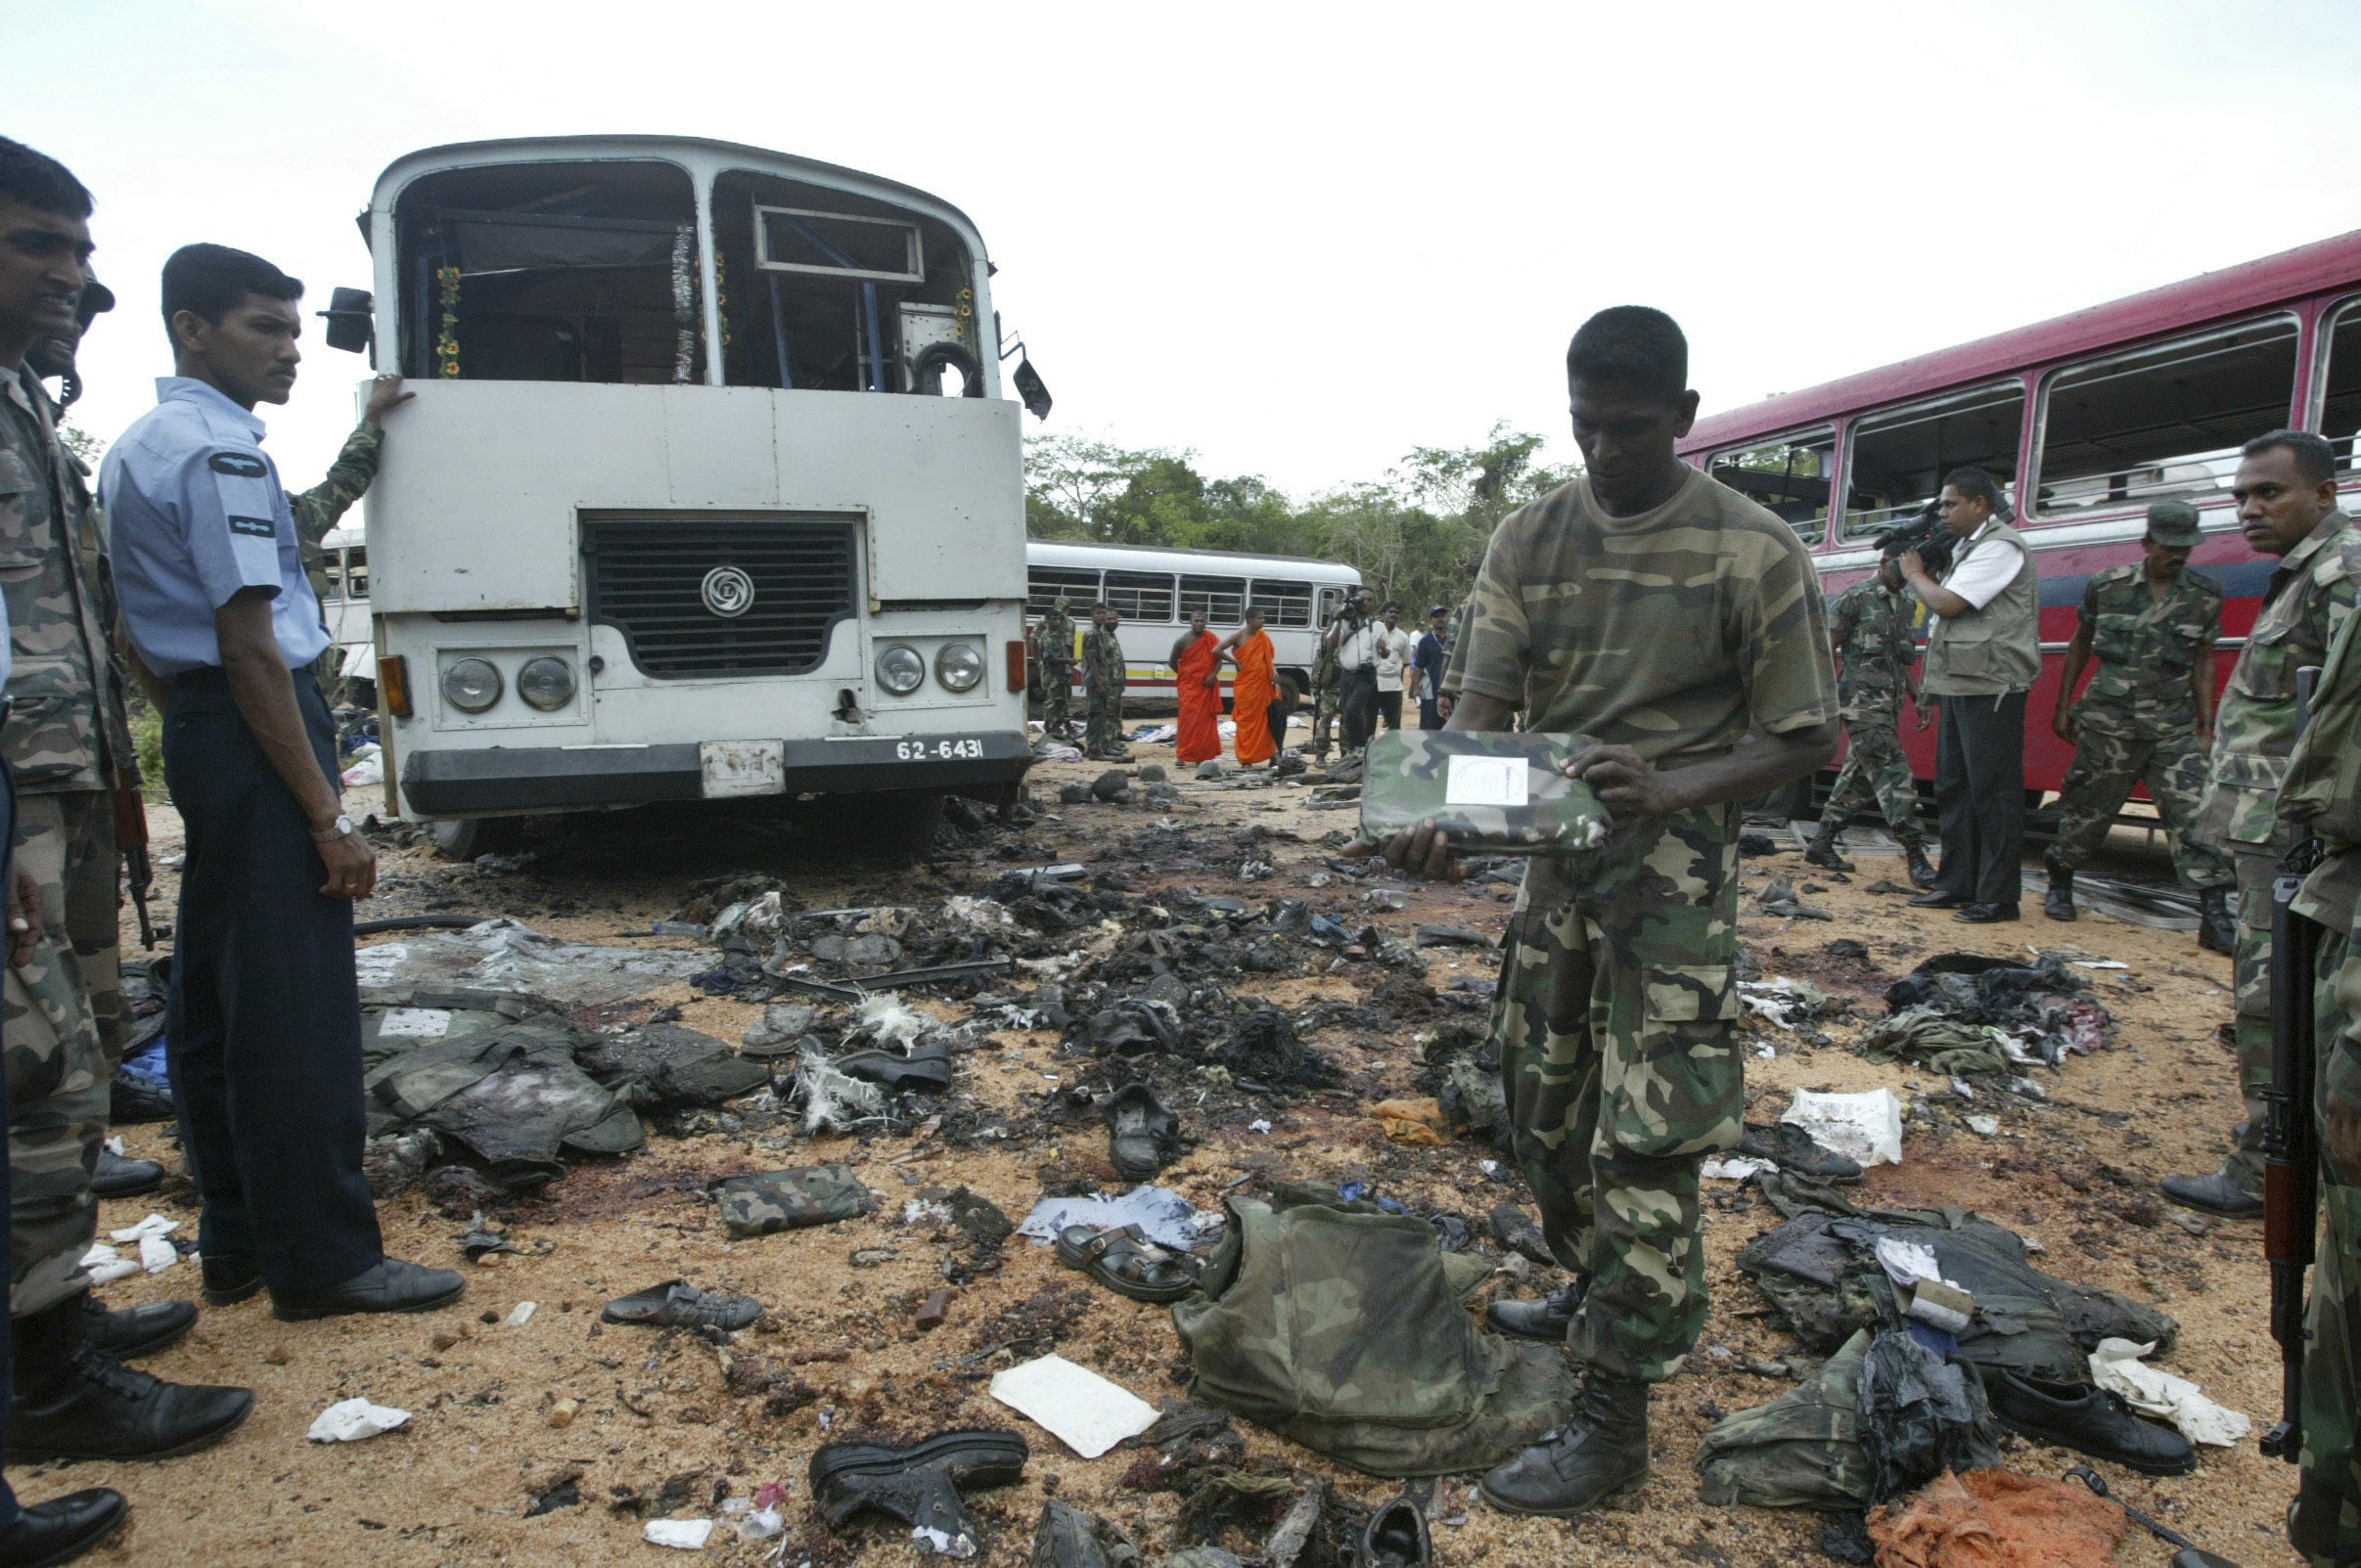 FILE - In this Oct. 16, 2006, file photo, a Sri Lankan soldier inspects the debris at the site of a suicide explosion by Tamil Tigers near Dambulla, about 150 kilometers (90 miles) northeast of Colombo, Sri Lanka. The April 21, 2019 deadly Easter attacks in Sri Lanka are a bloody echo of decades past in the South Asian island nation, when militants inspired by attacks in the Lebanese civil war helped develop the suicide bomb vest. Over nearly 30 years of civil war, the Tamil Tigers would launch more than 130 suicide bomb attacks, making them the leading militant group in such assaults at the time.